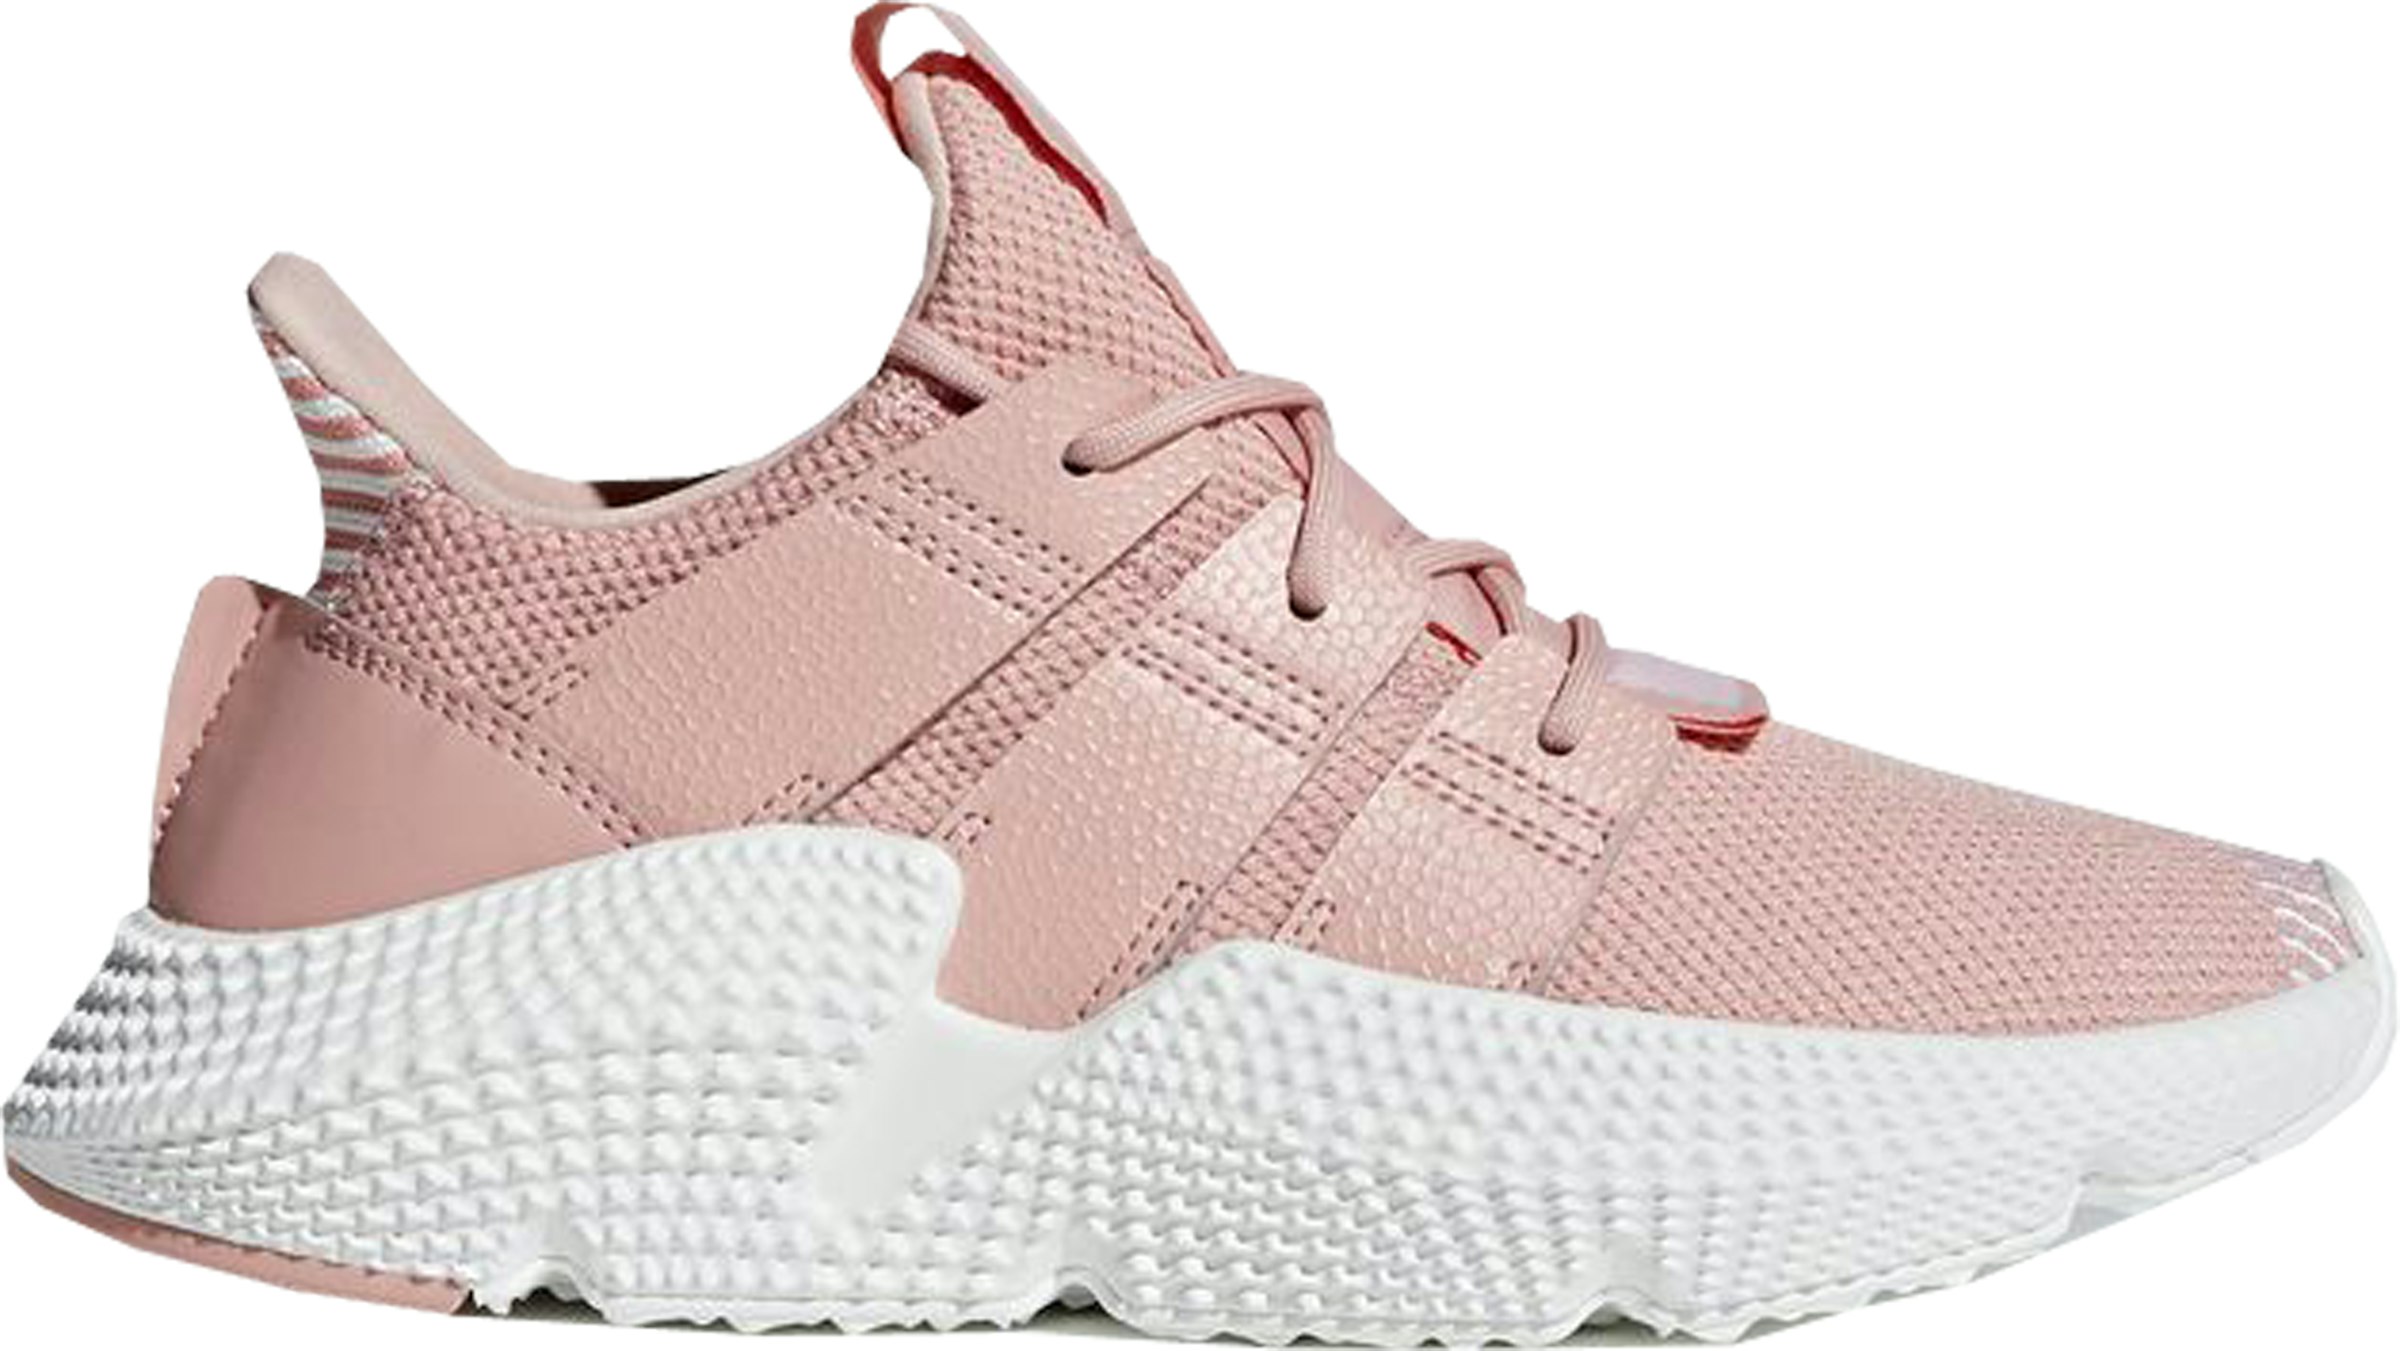 adidas Prophere Trace Pink (Youth) niños - B41881 - MX